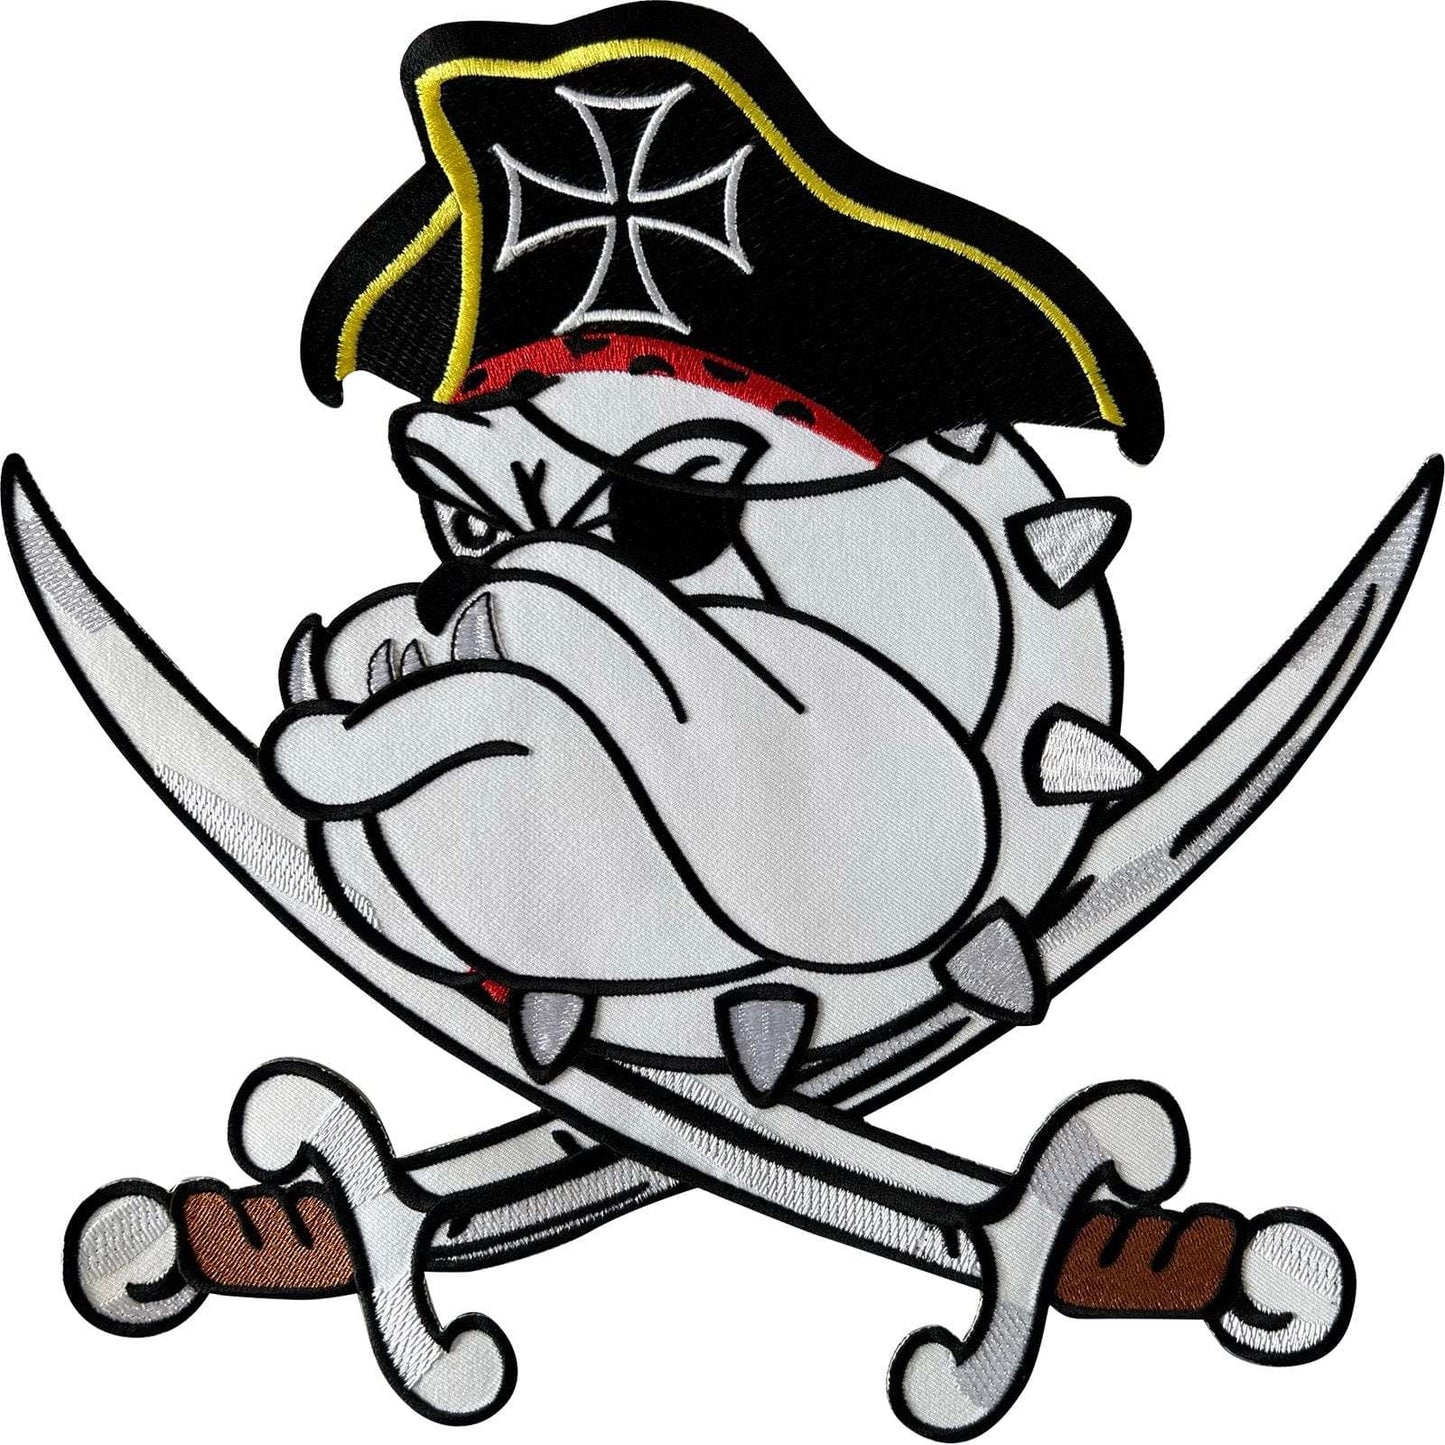 Big Large Crossed Cutlass Pirate Bulldog Patch Iron On Sew On Embroidered Badge